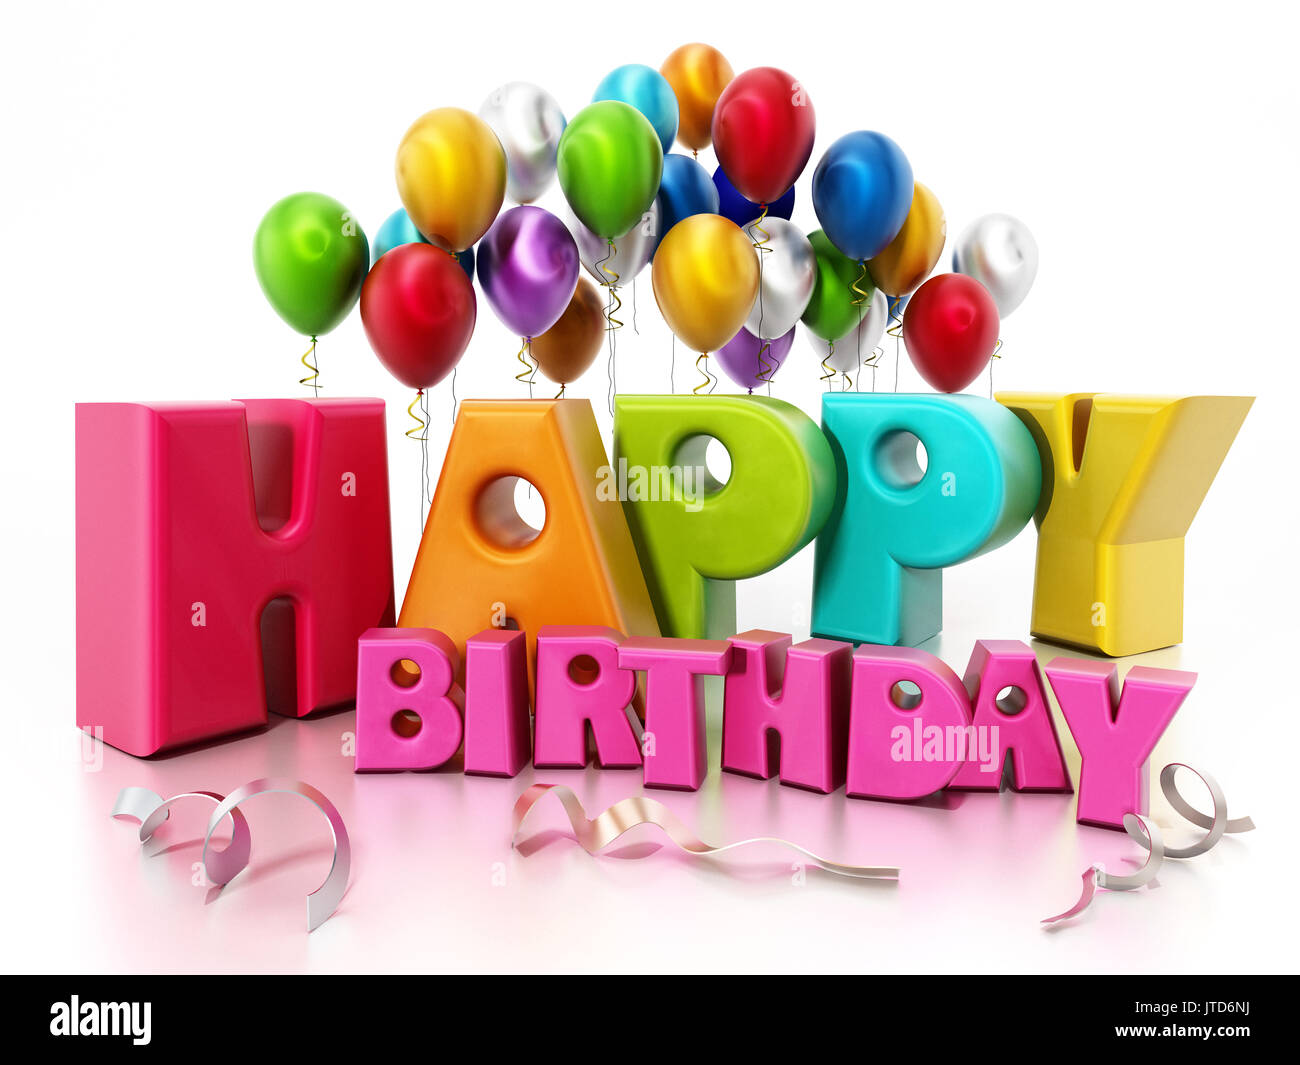 Happy Birthday Text And Party Balloons 3d Illustration Stock Photo Alamy